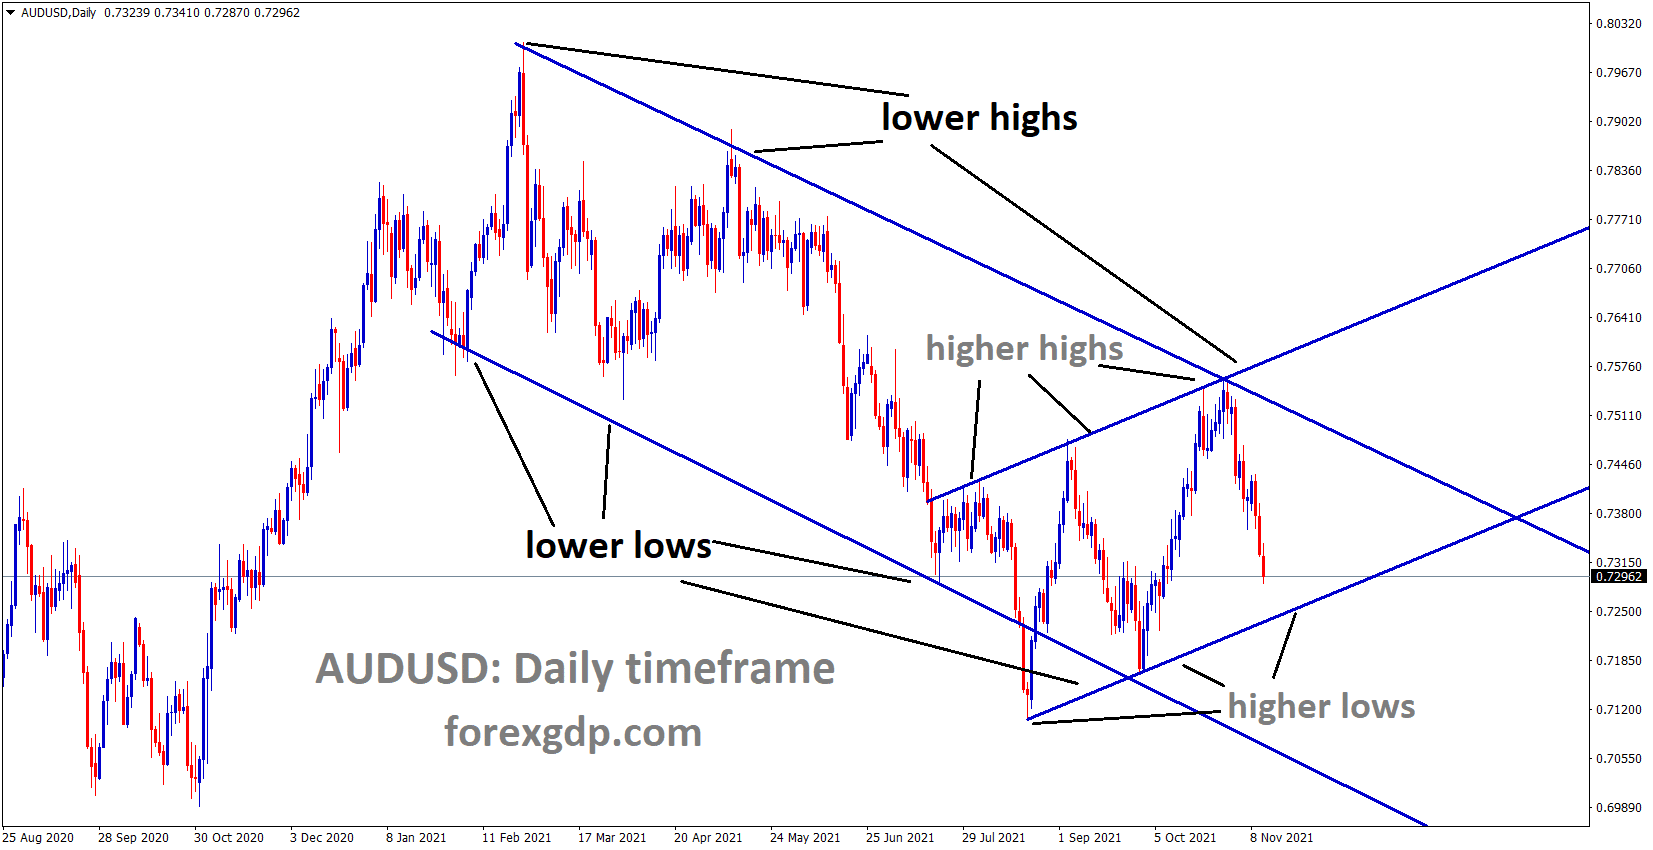 AUDUSD is moving in the Descending channel and the market fell from the Lower high area